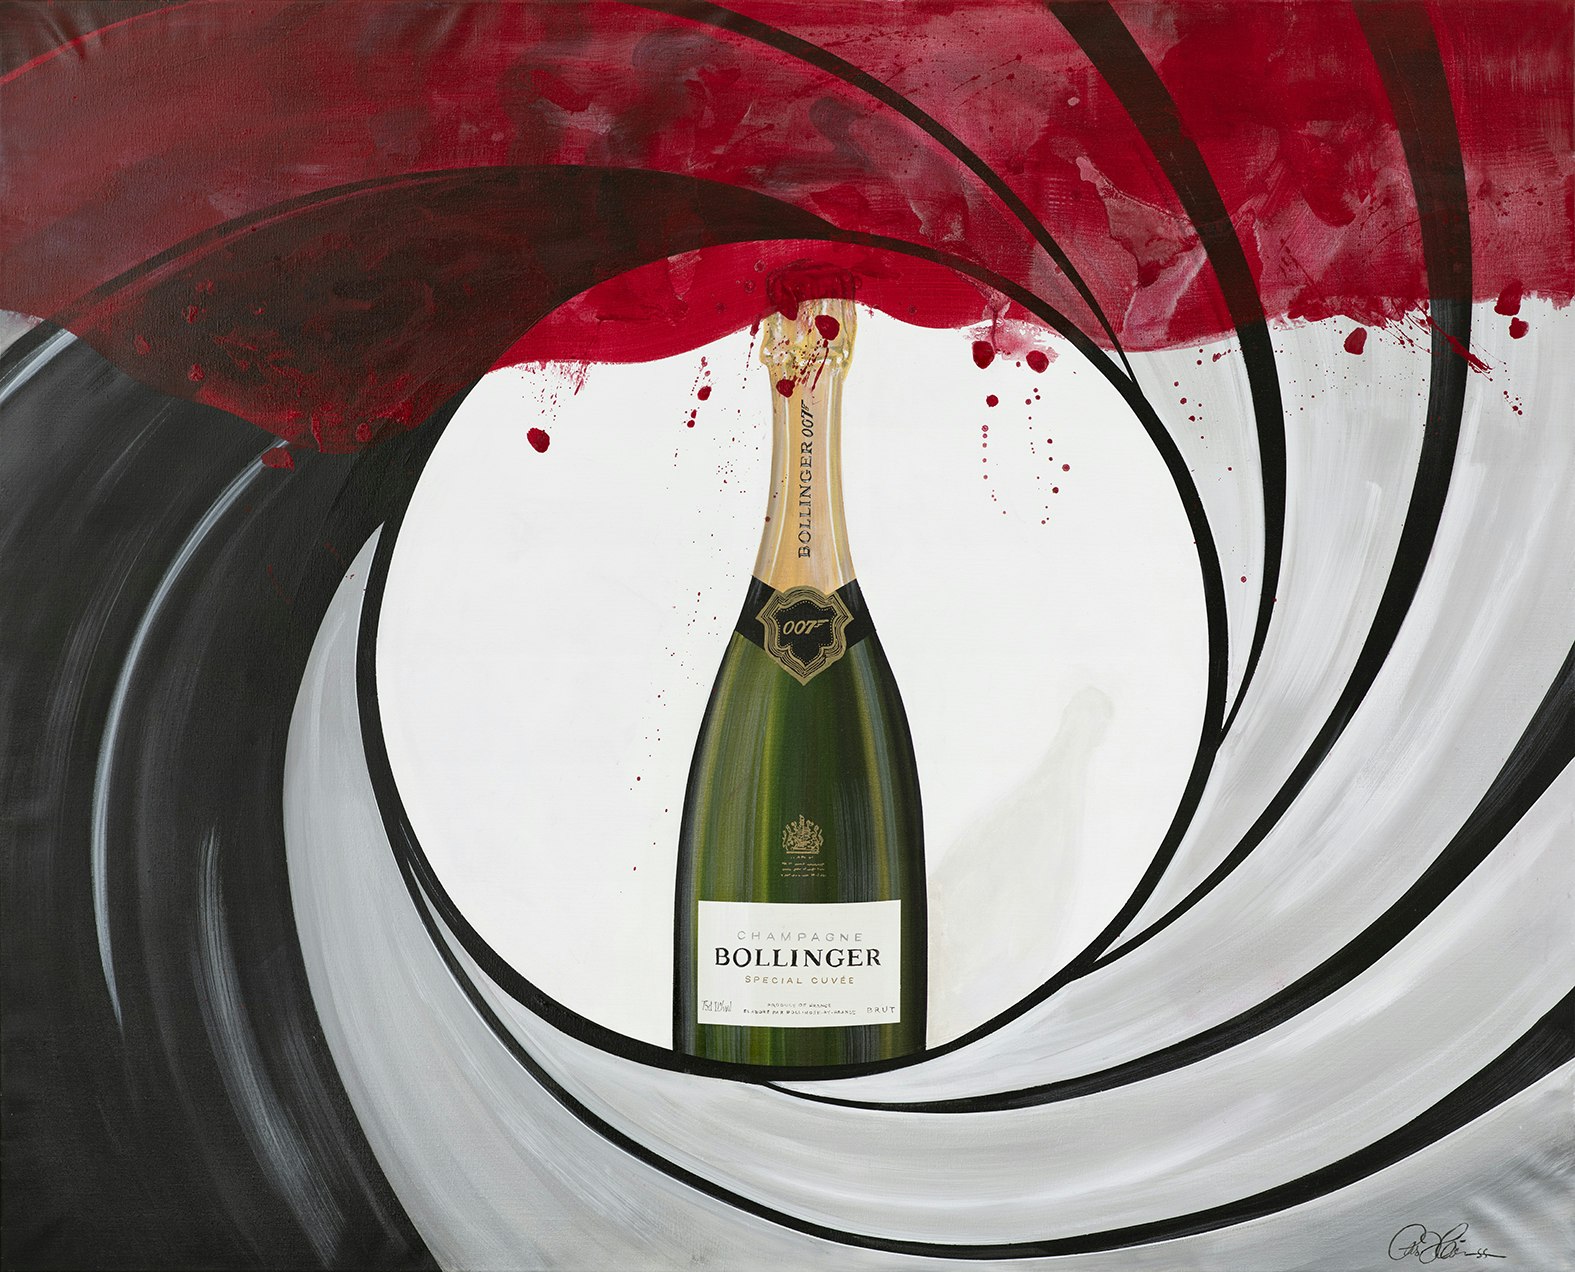 BOLLINGER - NO TIME TO DIE WITHOUT BOLLINGER